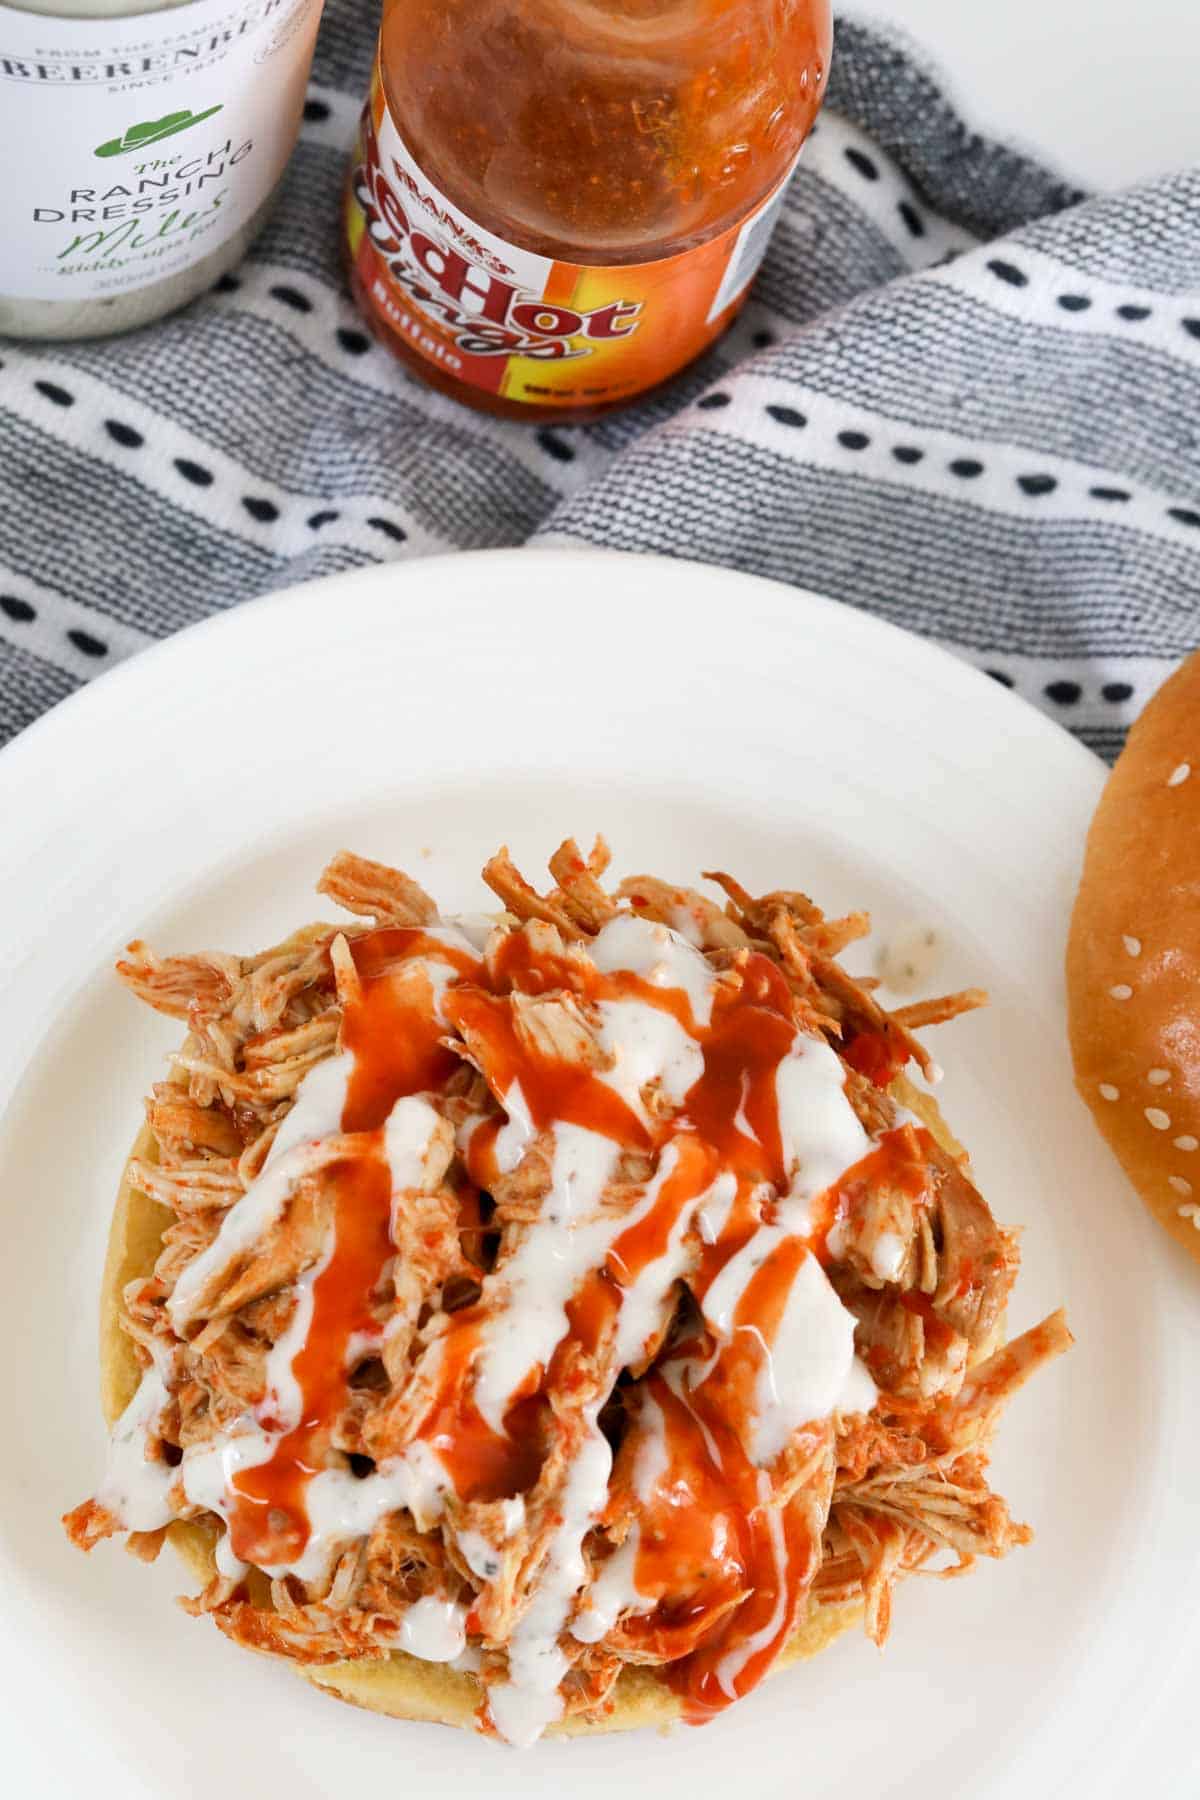 An overhead shot of ranch dressing and spicy sauce on shredded chicken.